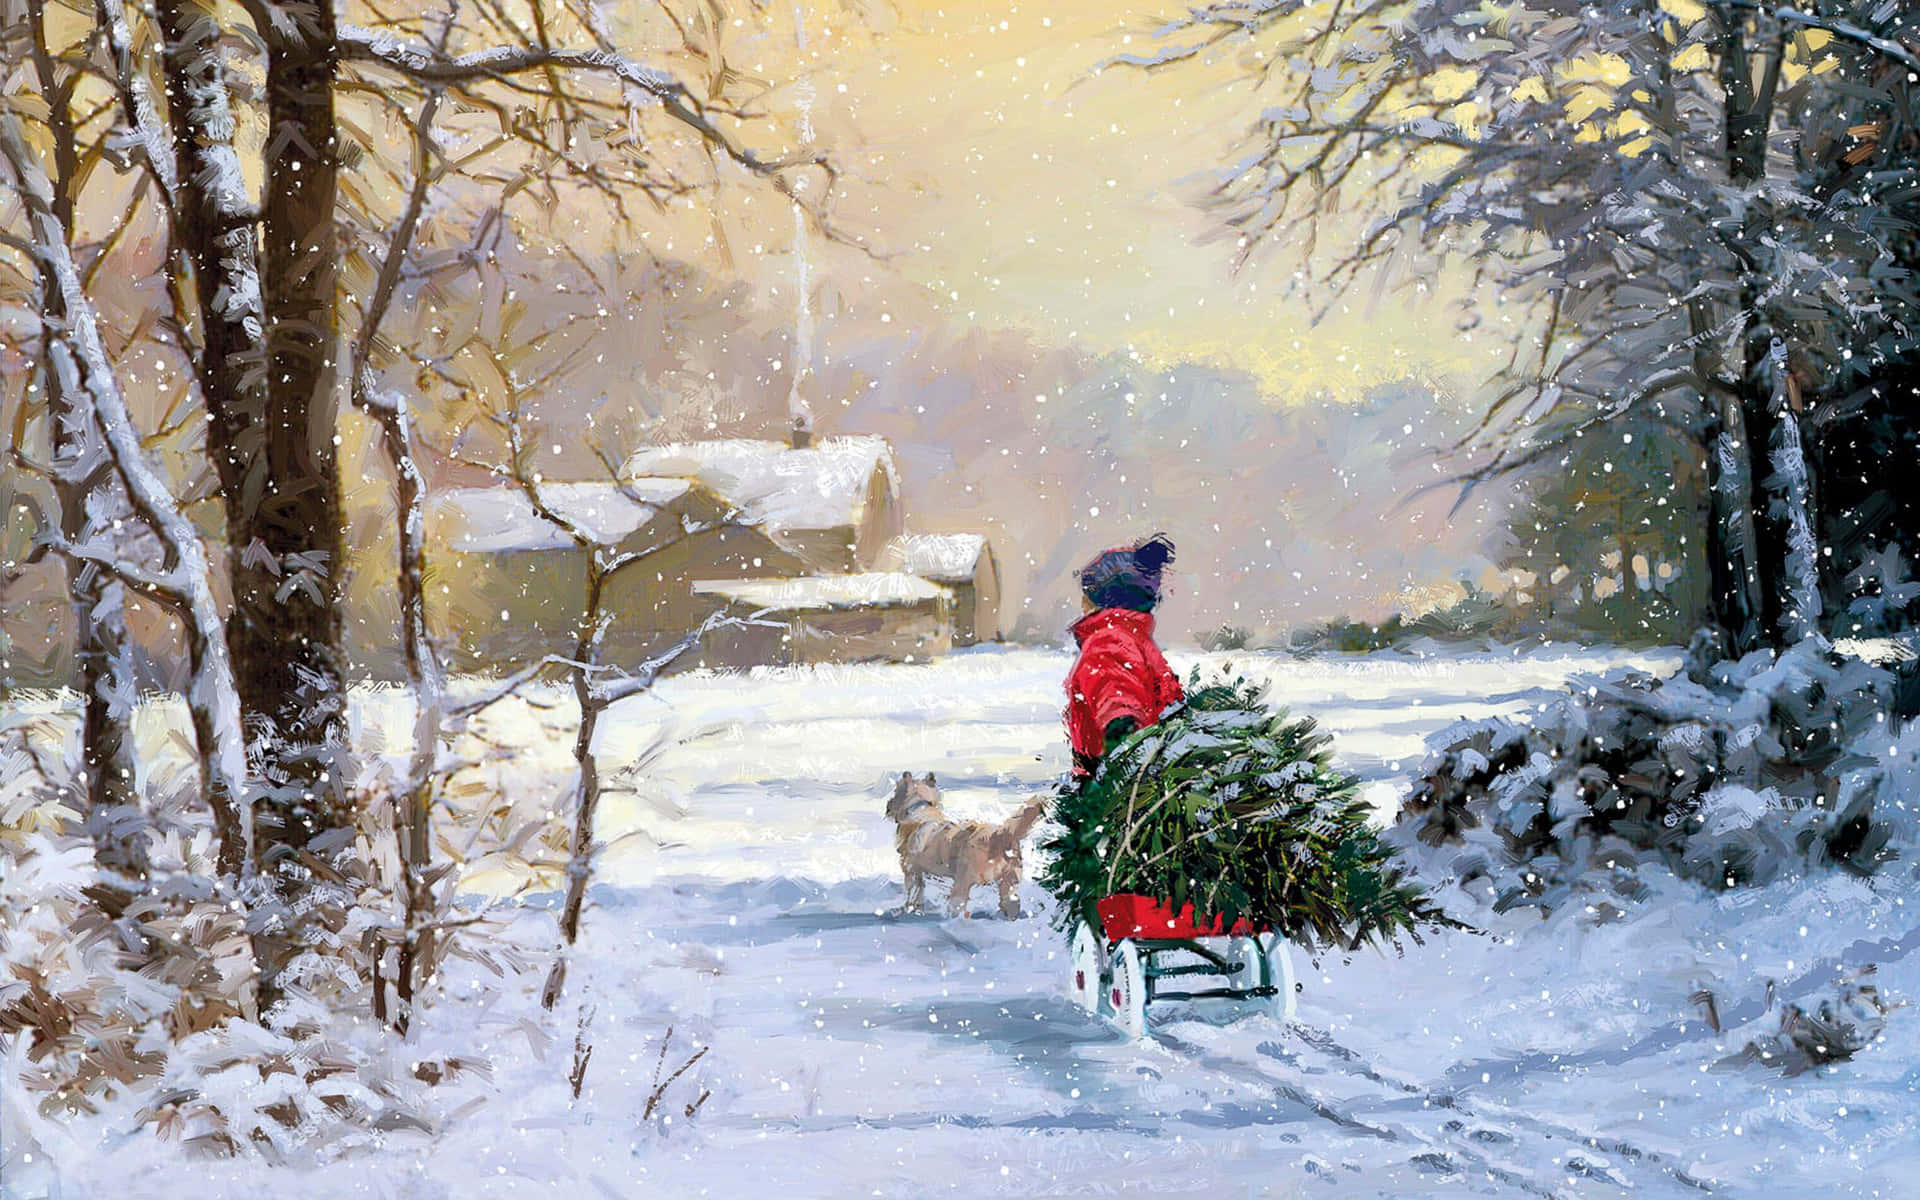 A Painting Of A Woman Walking With A Sleigh In The Snow Wallpaper